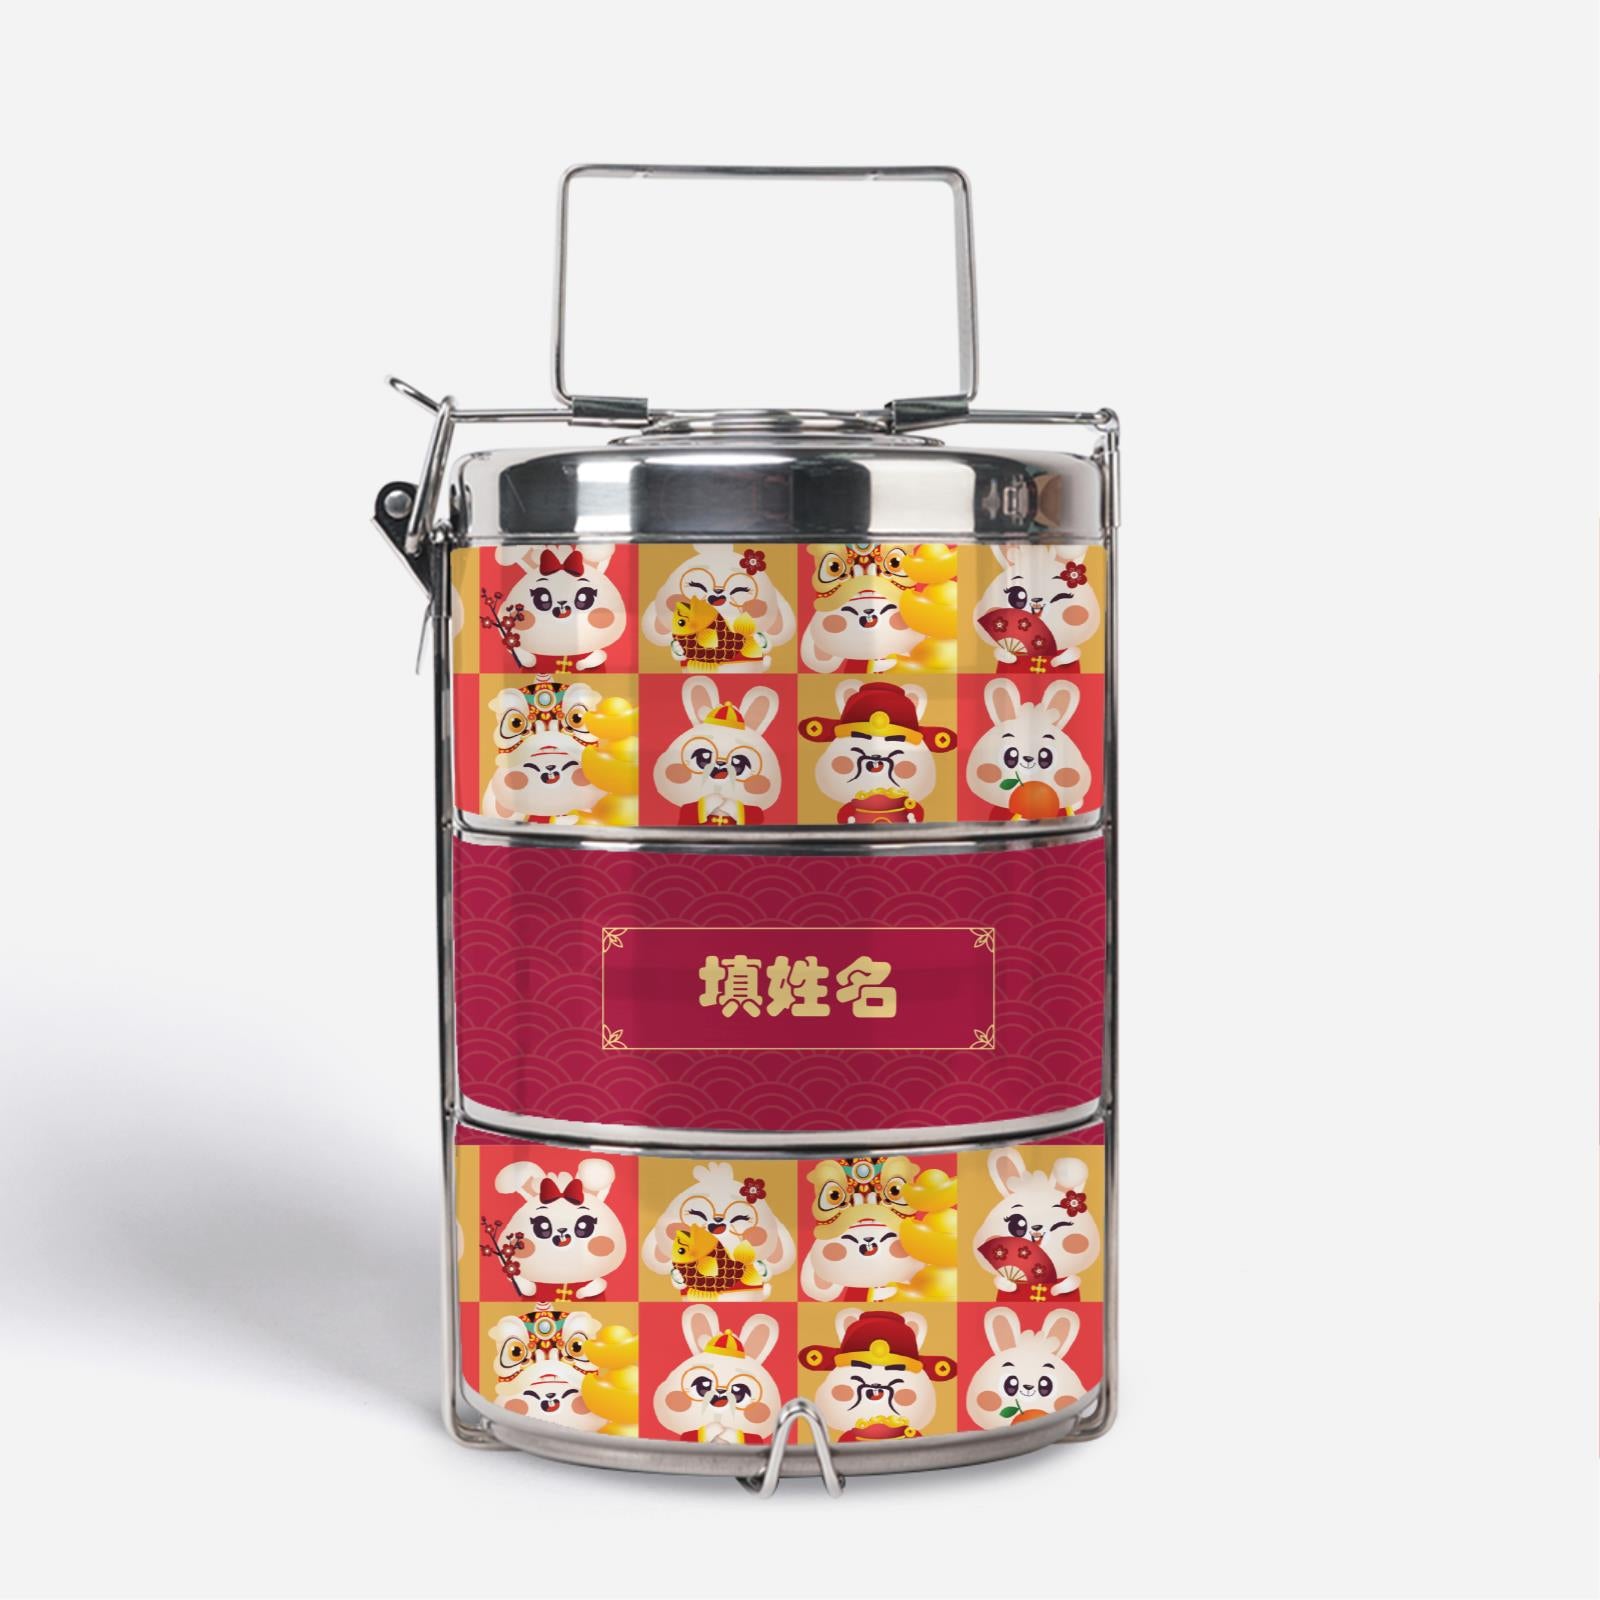 Cny Rabbit Family - Rabbit Family Red Premium Tififn Carrier With Chinese Personalization